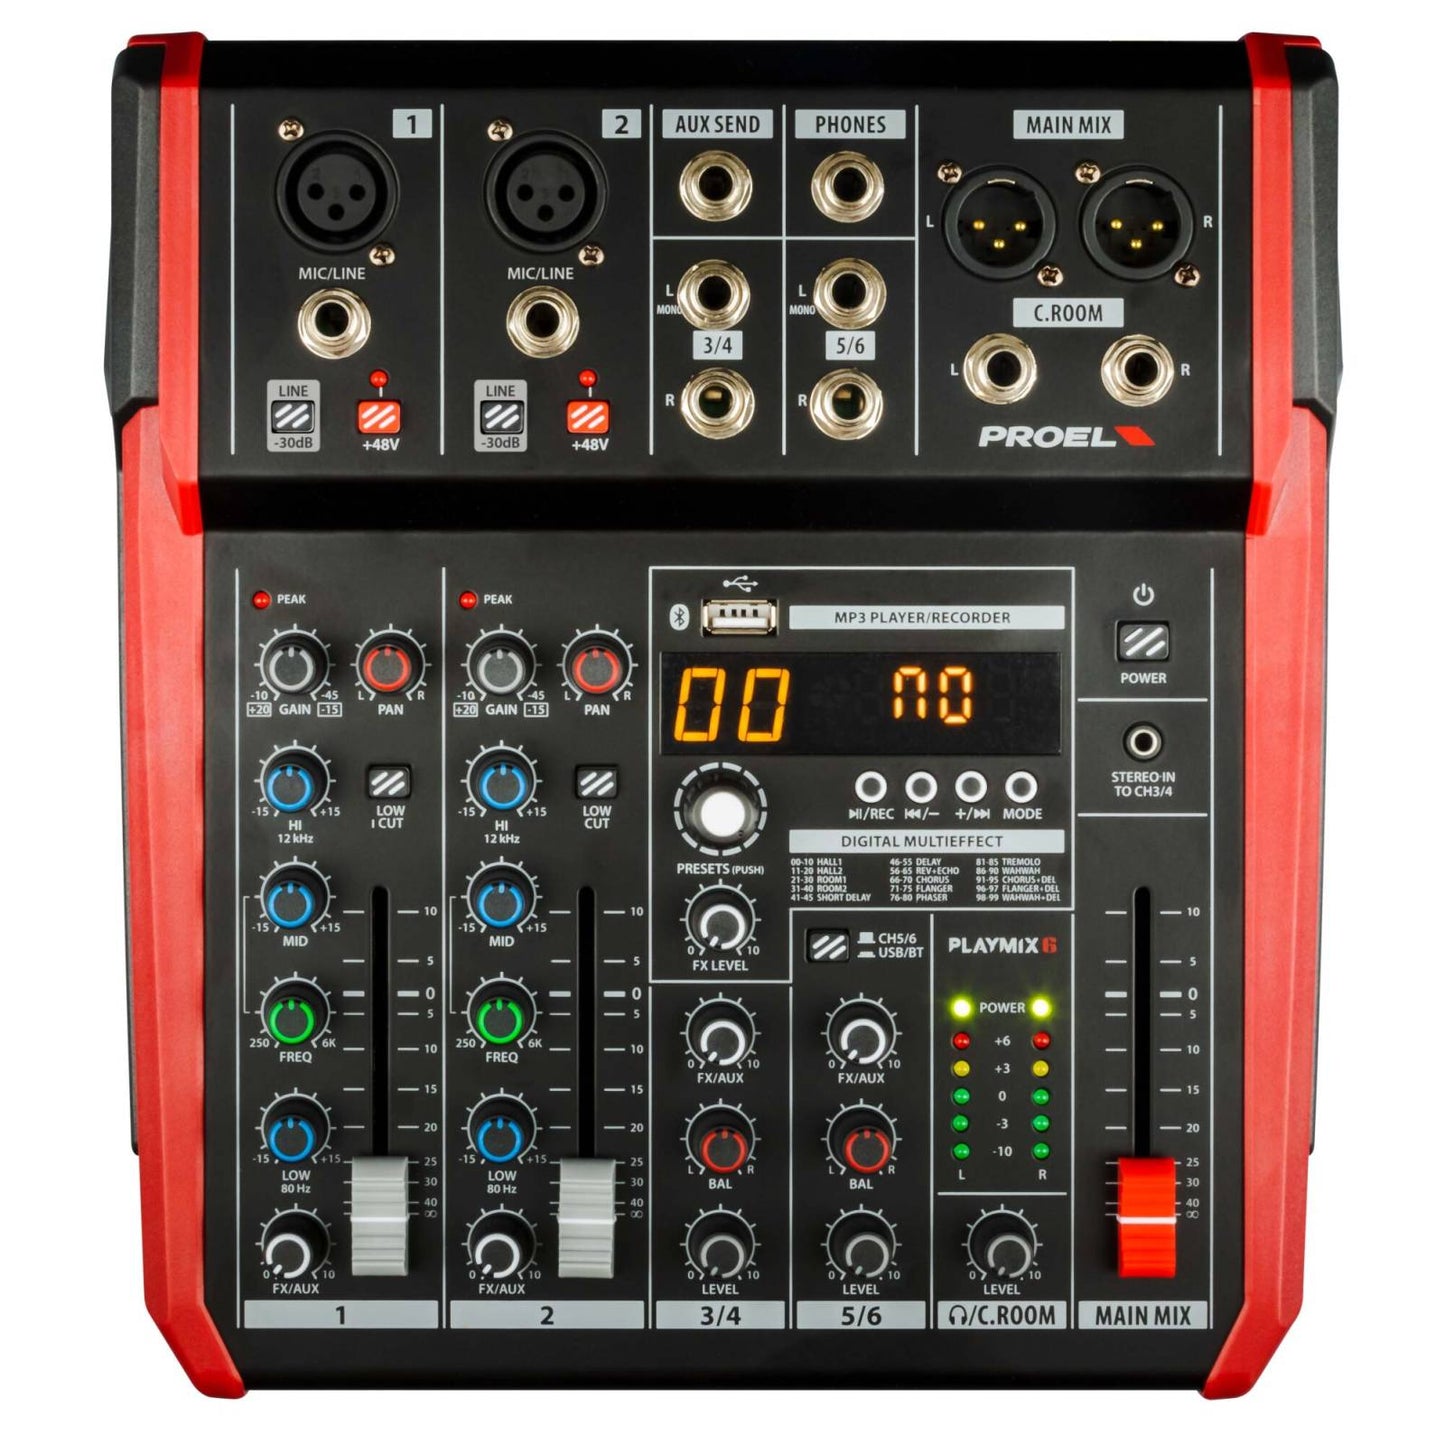 Proel PlayMix 6 6-Channel Compact Mixer